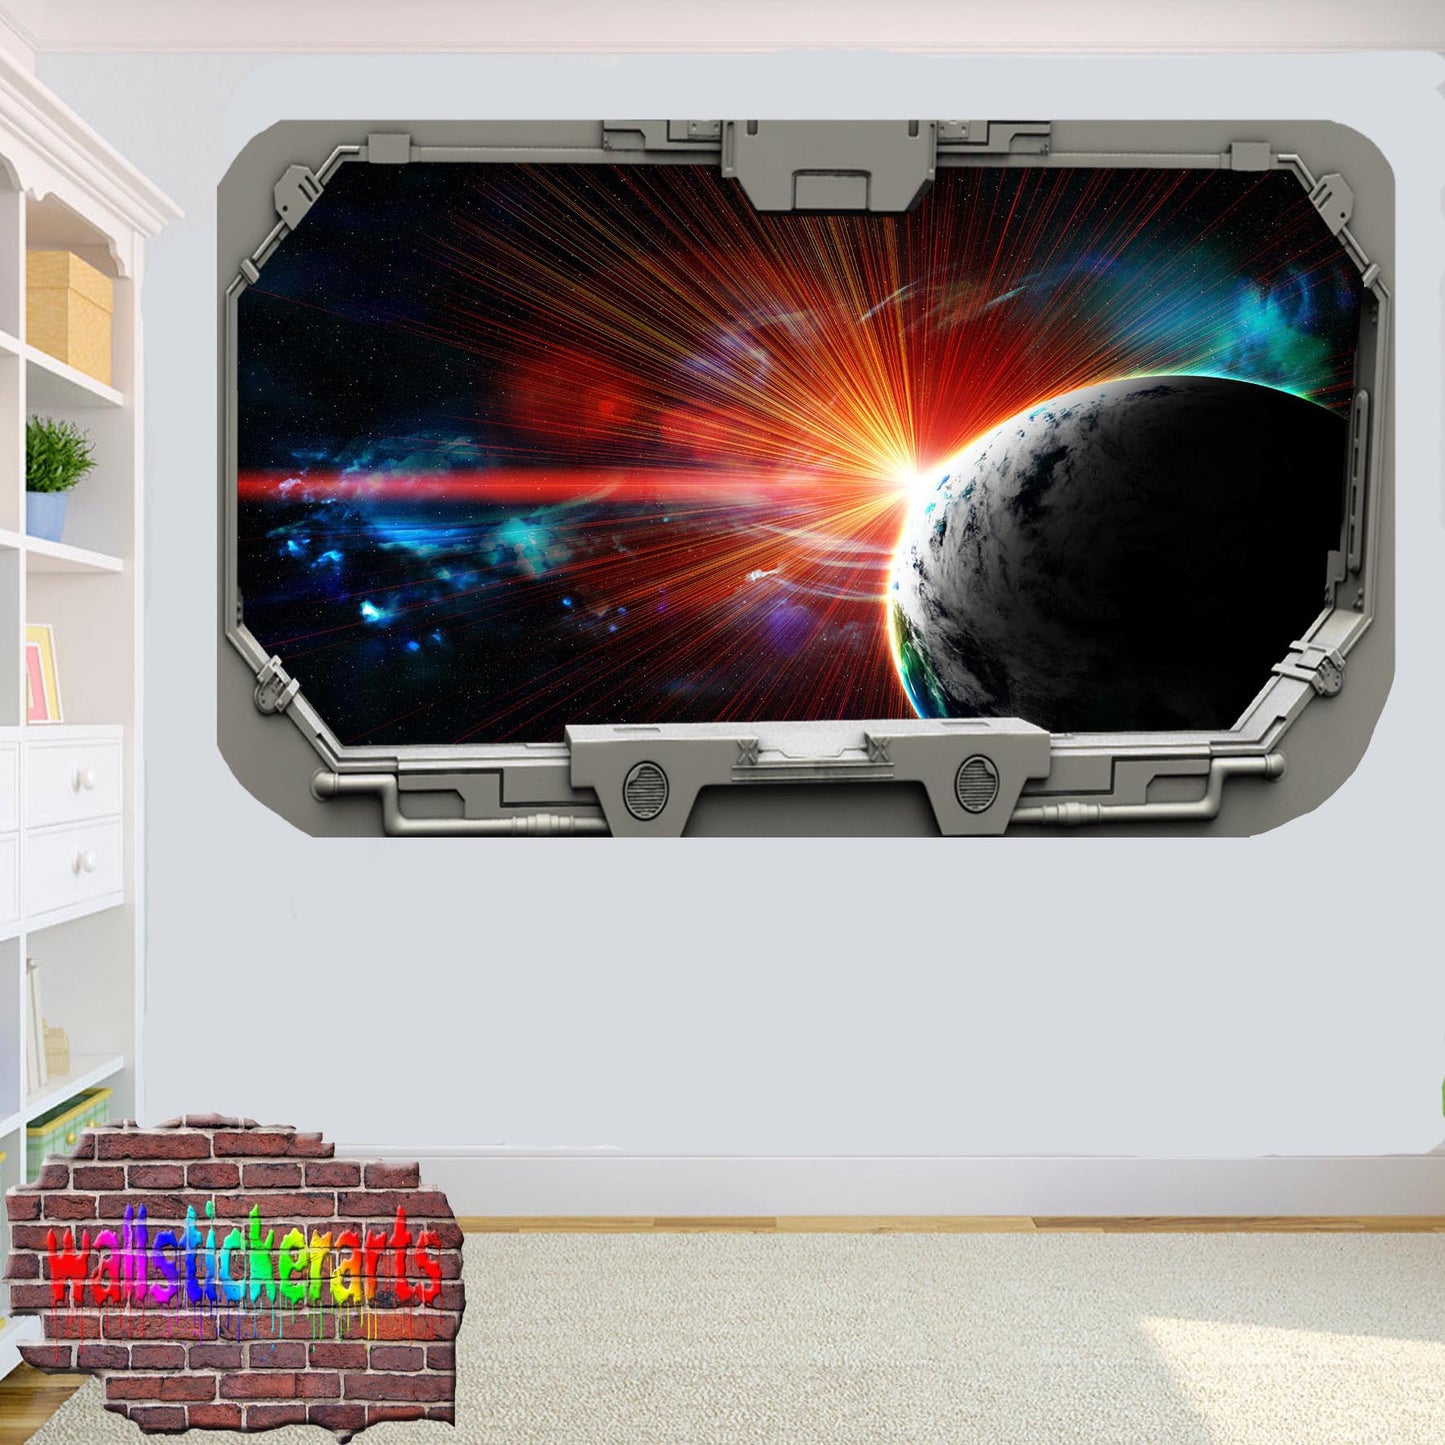 Blue Planet Earth and Sun From Spacecraft Window Wall Sticker Room Decoration Decal Mural